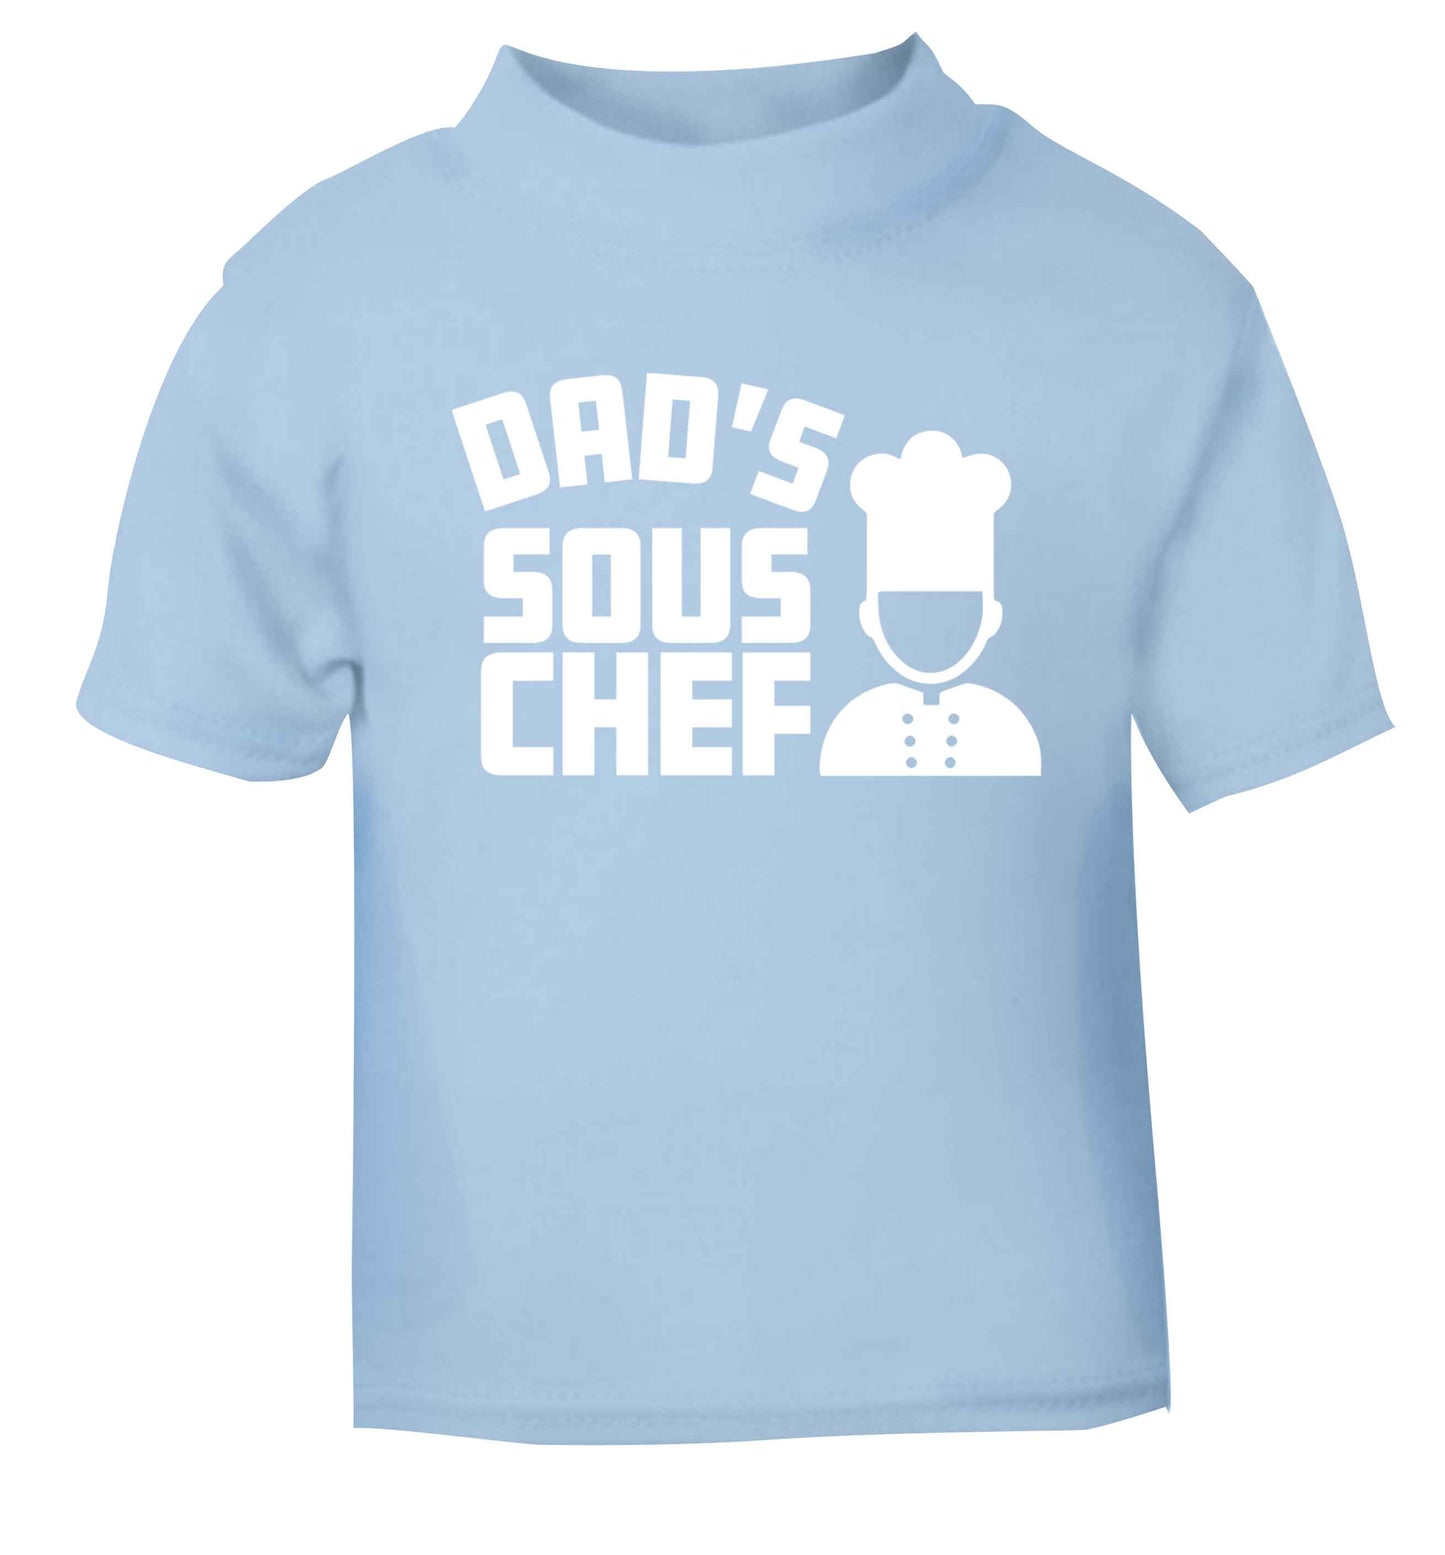 Dad's sous chef light blue baby toddler Tshirt 2 Years